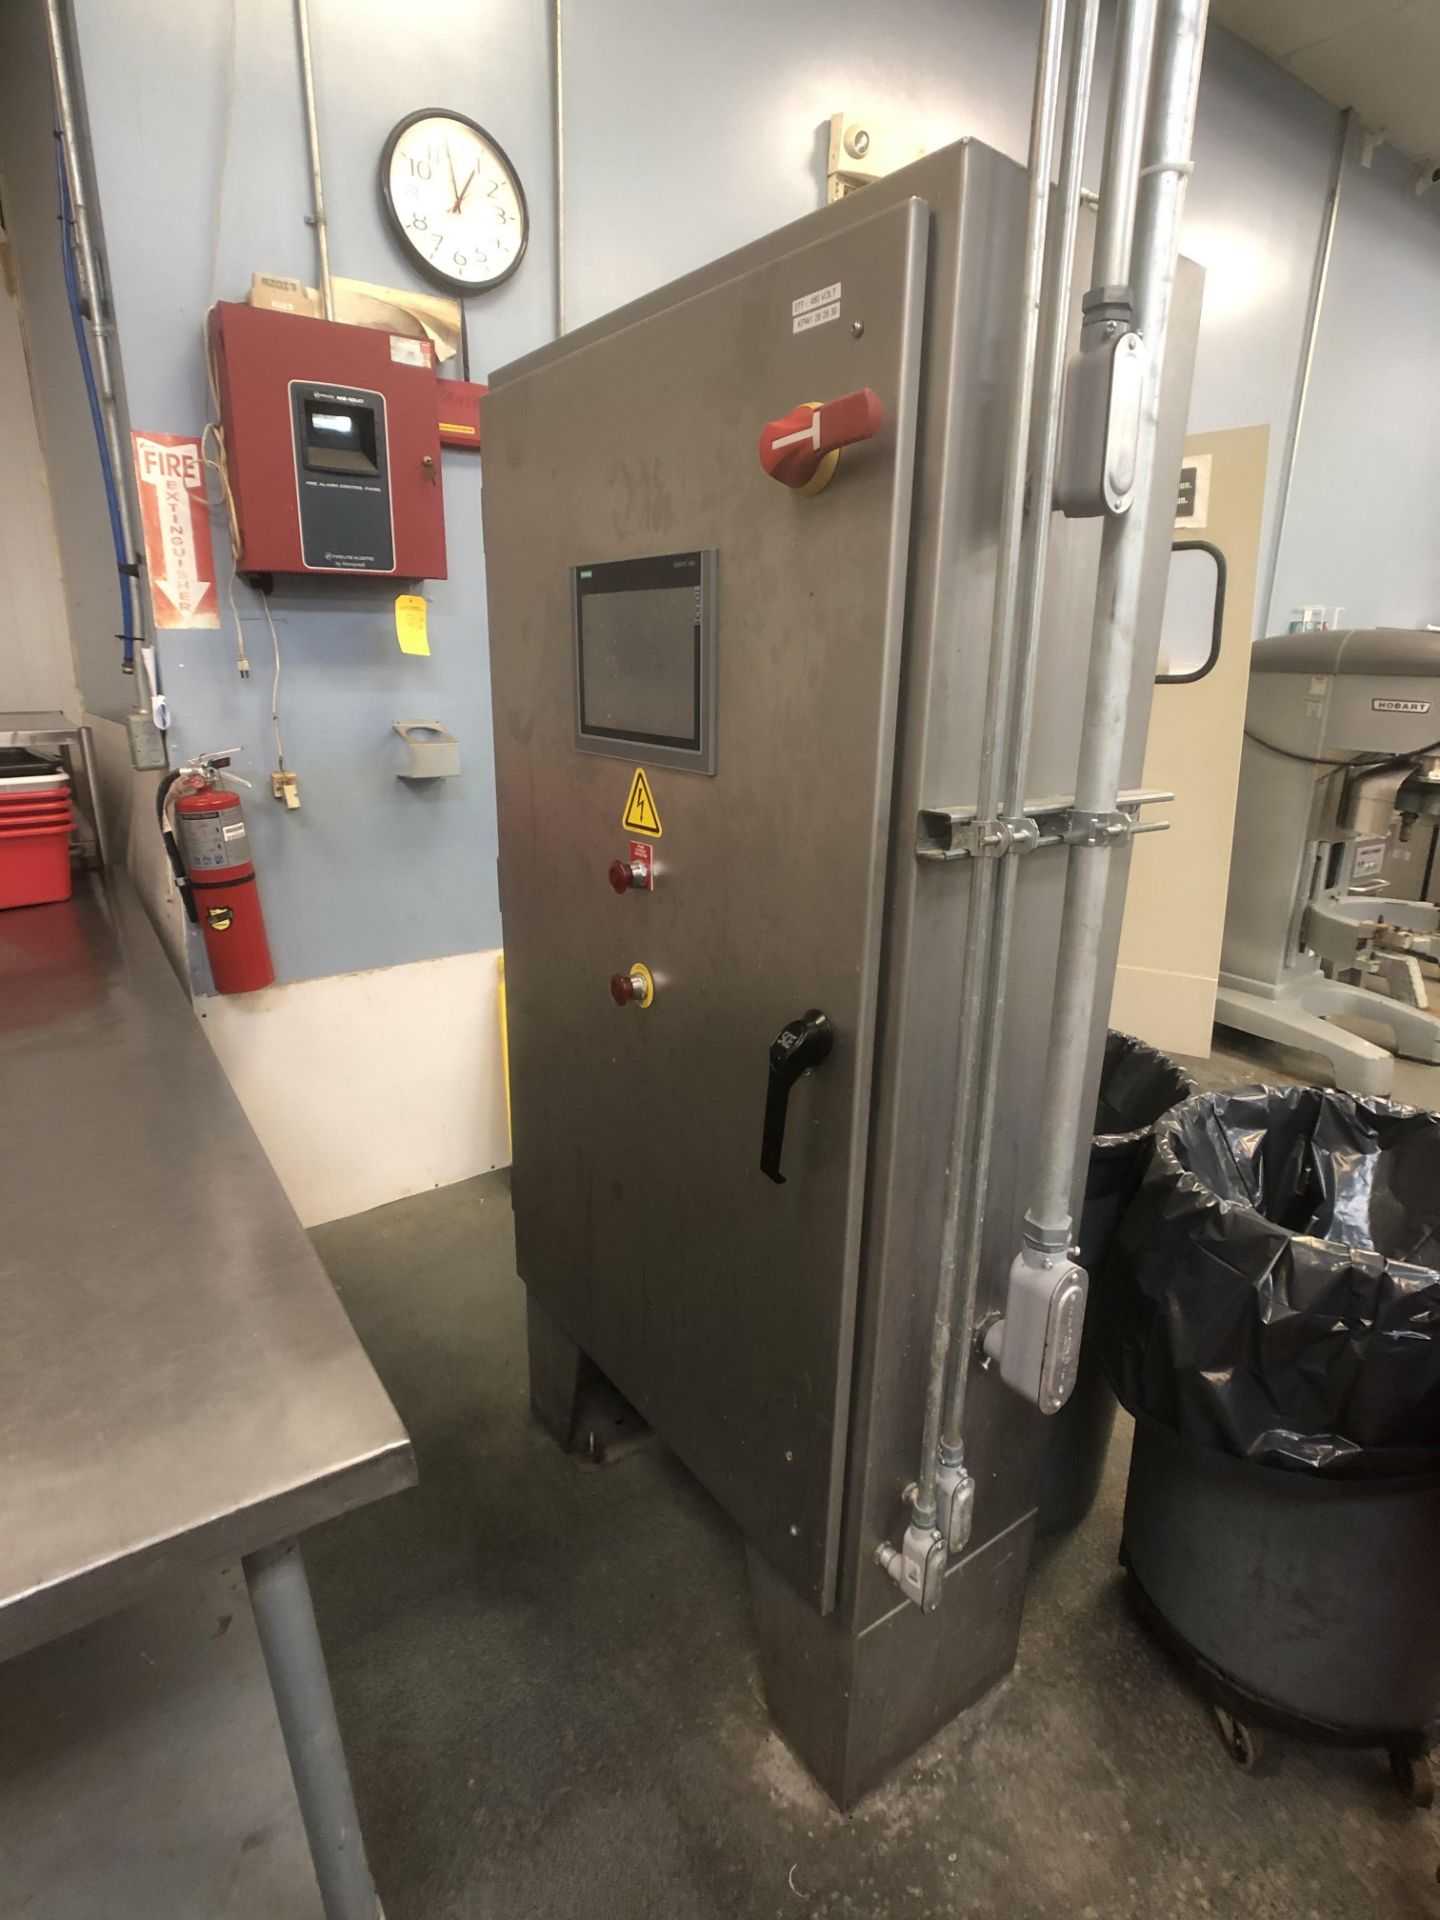 2019 Unitherm Food Systems 24" Flame Grill with Preheat, Model FG-24-8B-P, S/N FLGR-2485, Includes - Image 3 of 19